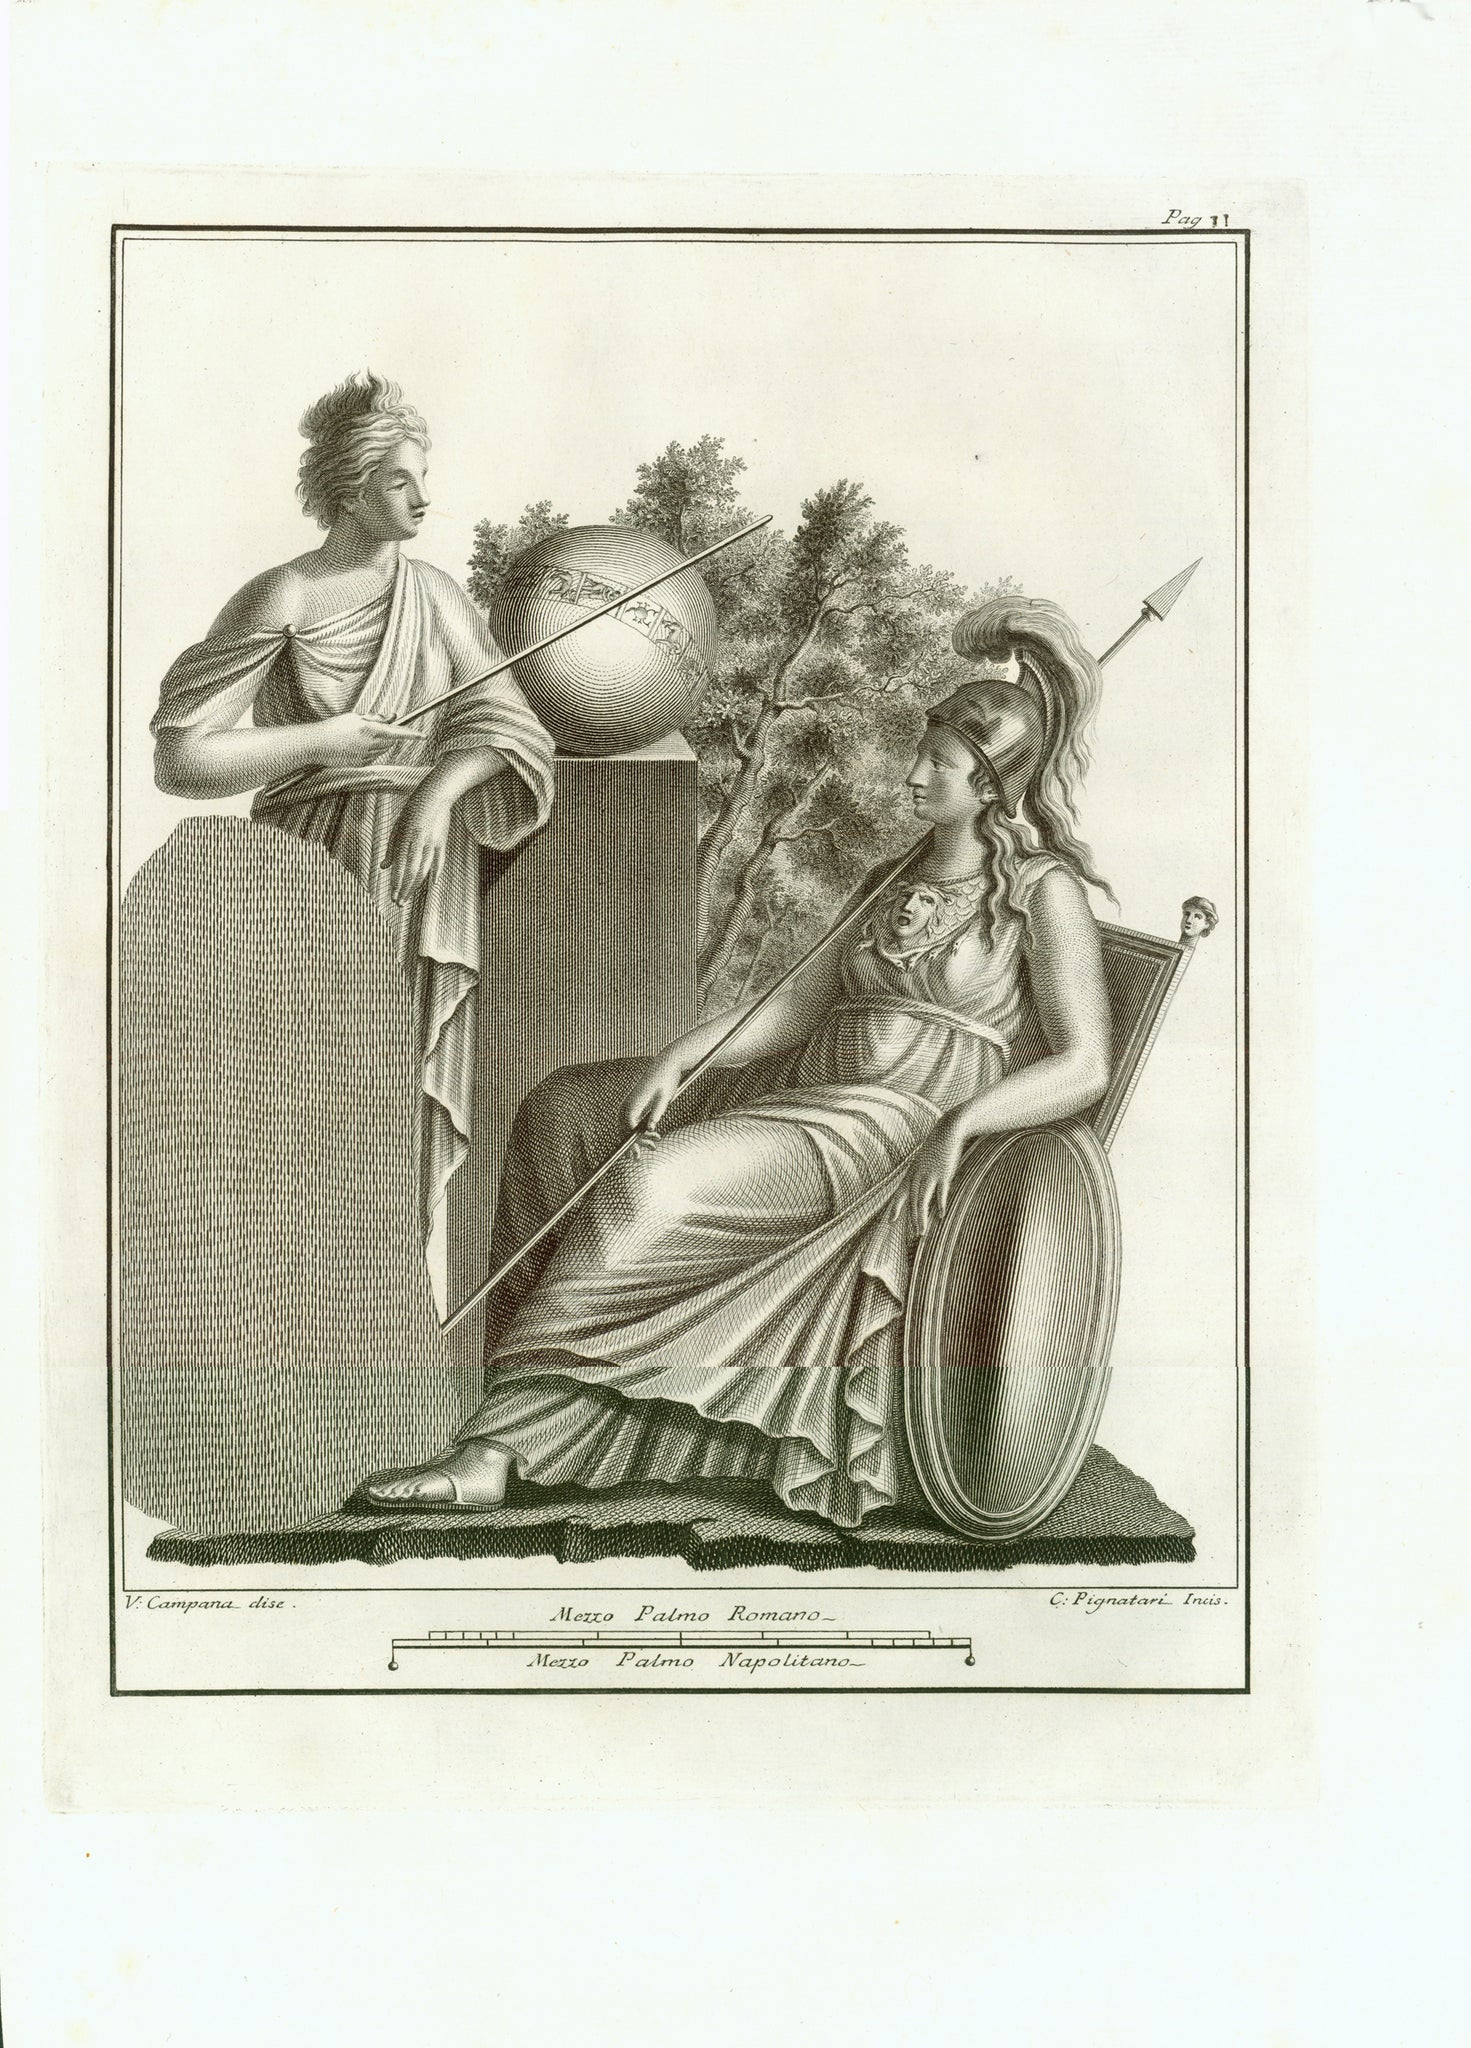 Urania, in Greek Mythology the muse of Astronomy here with Pallas Athene. Urania demonstrates the zodiac pictured as a ribbon around the earth.  Copper etching by C. Pignatari after the drawing by V. Campana  Published in "Antichita di Ercolano eposte" 8 volumes.  Naples, Napoli, Neapel, 1757-1792 interior design, wall decoration, ideas, idea, gift ideas, present, vintage, charming, special, decoration, home interior, living room design